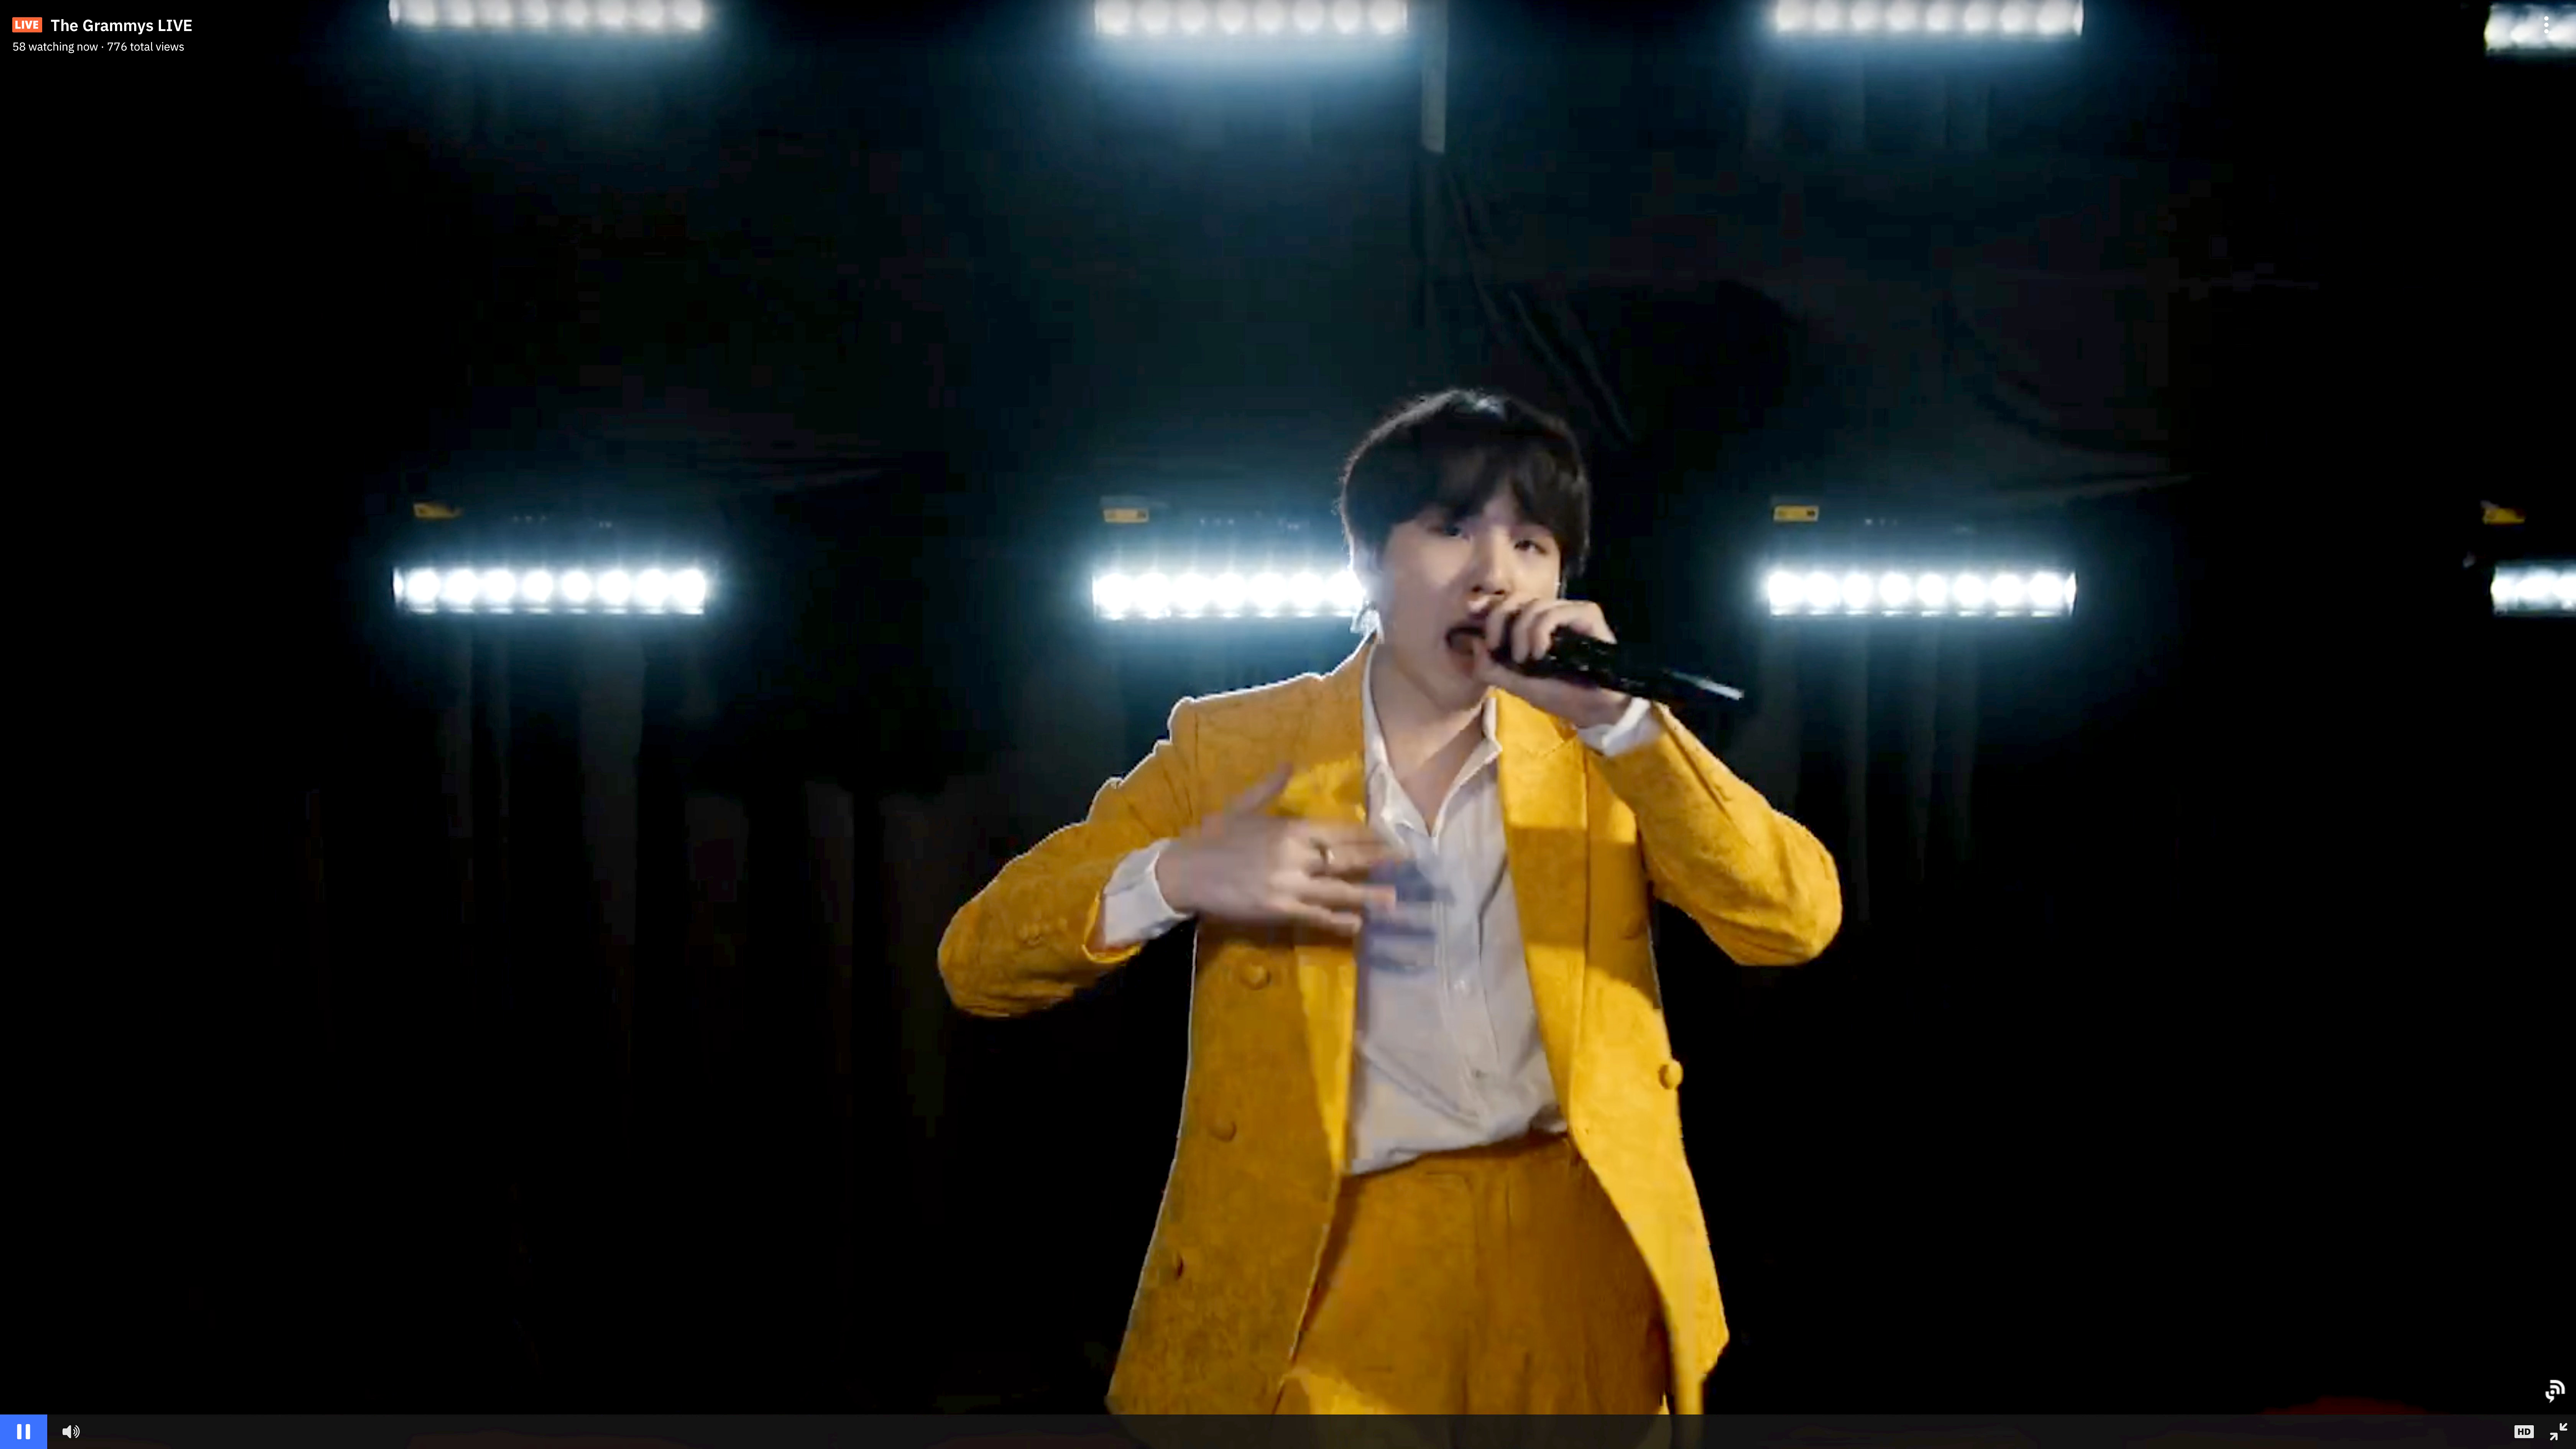 Suga of BTS performs on stage during the 63rd Annual GRAMMY Awards dressed in a yellow suit